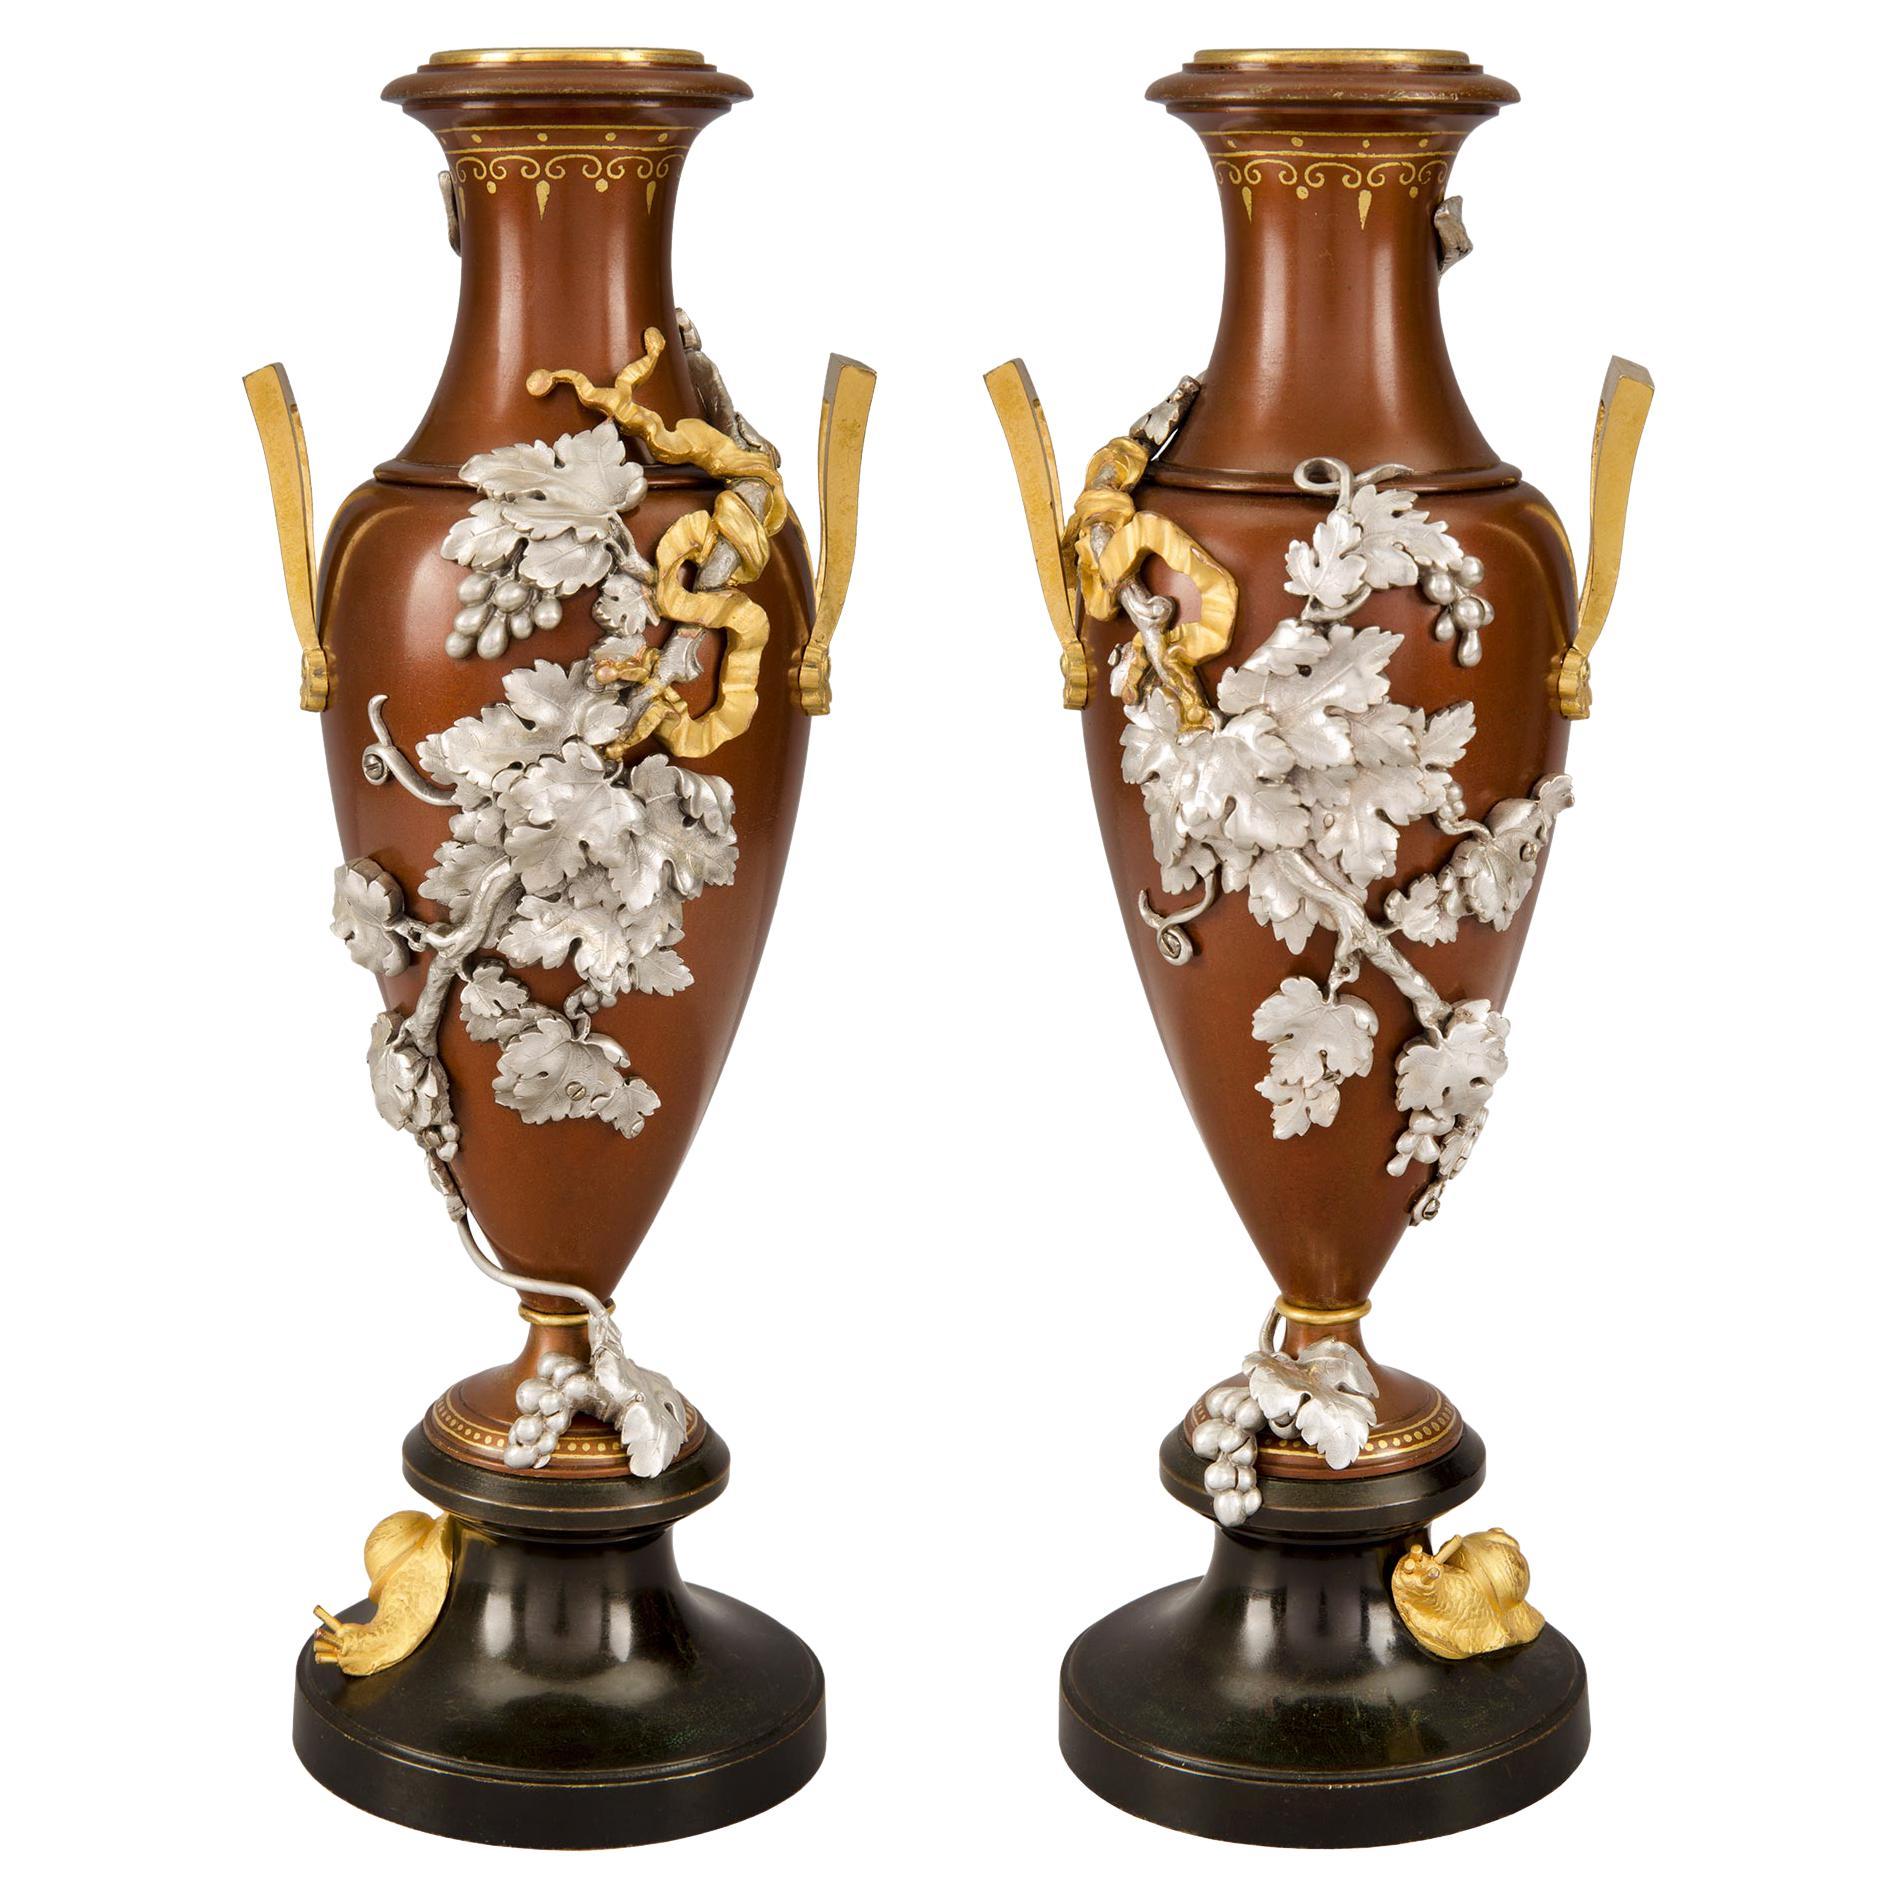 Pair of French 19th Century Louis XVI Style Ormolu and Bronze Urns